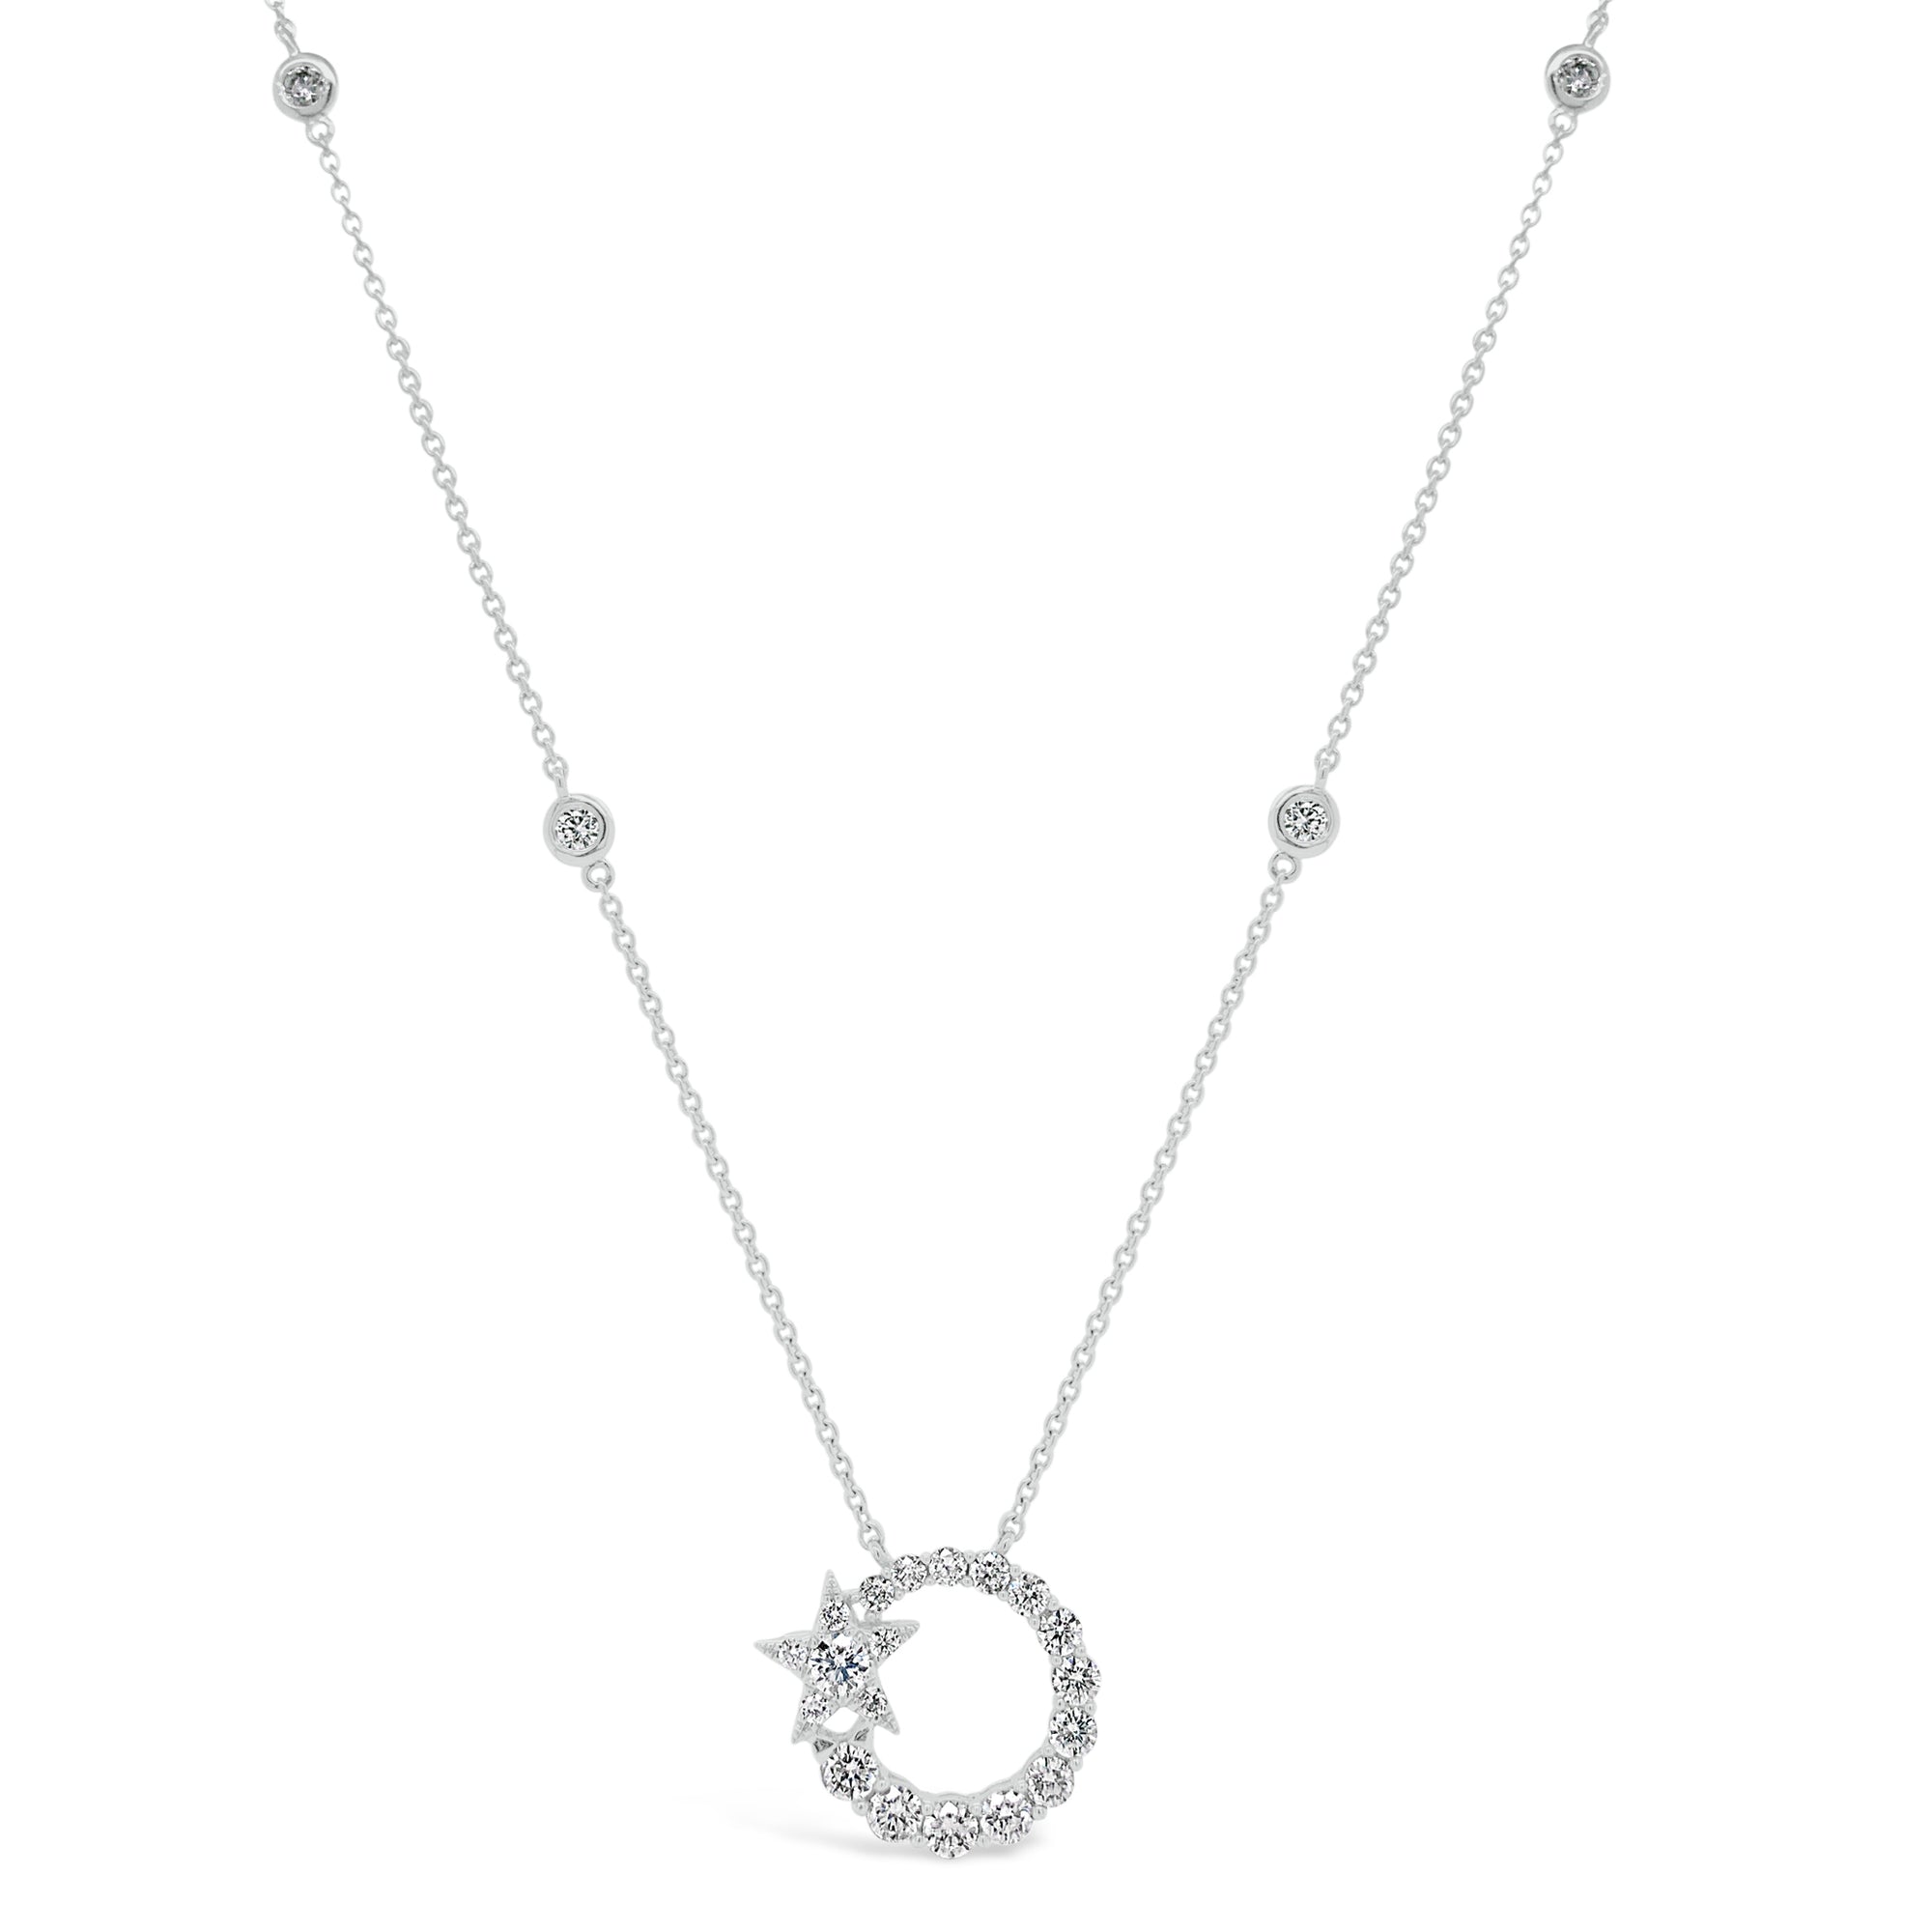 Diamond Circle Pendant Necklace with Star   - 18K gold weighing 4.67 grams.   - 32 round diamonds totaling 0.86 carats.